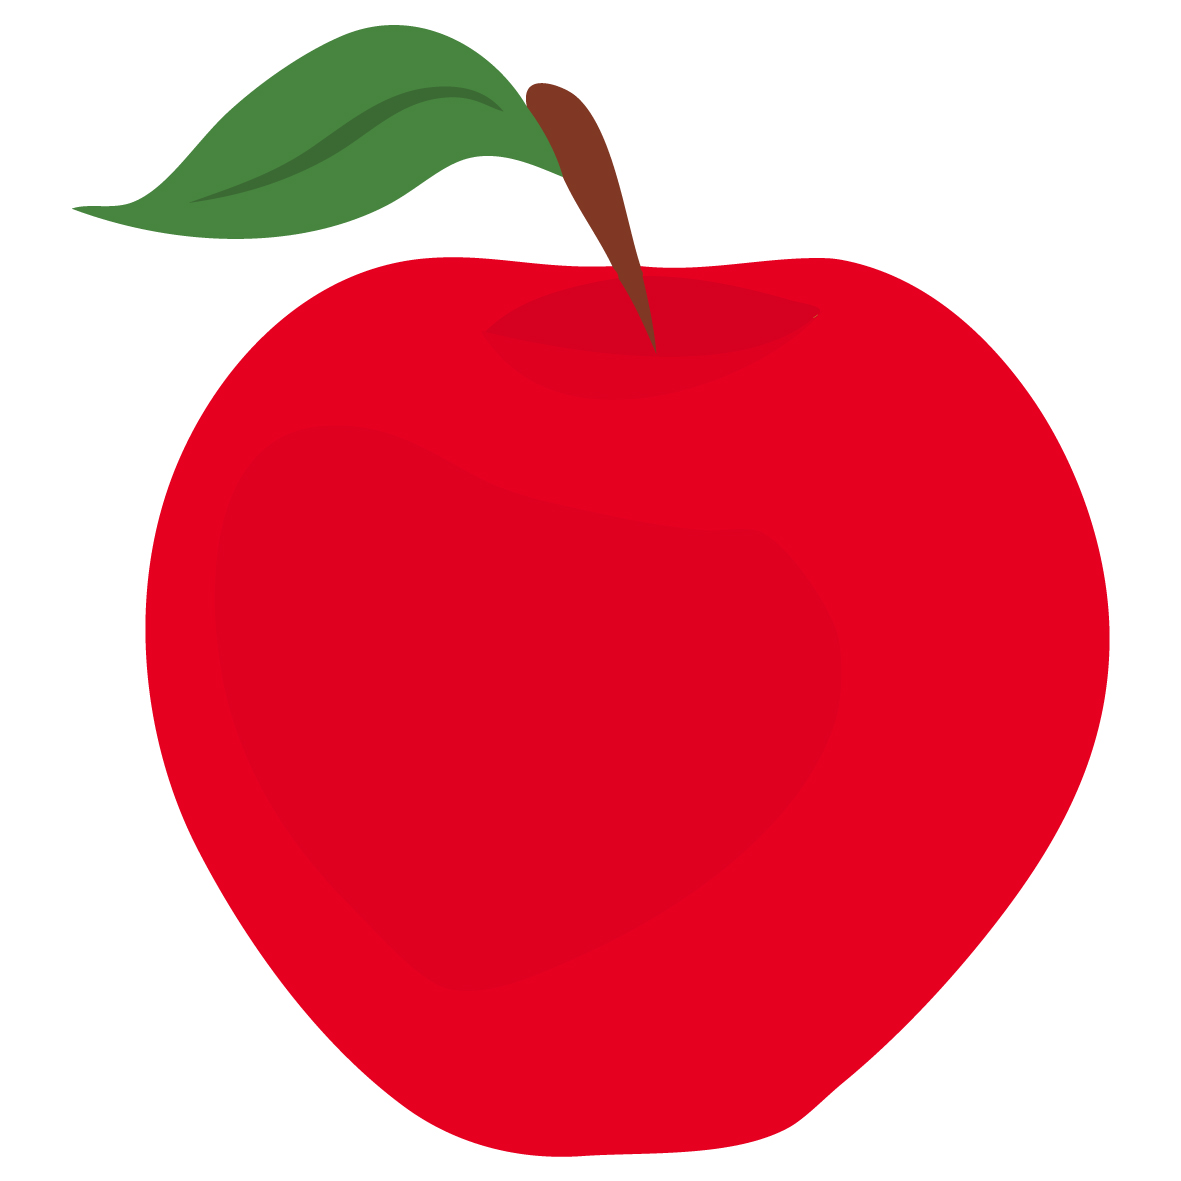 Apple background clipart.